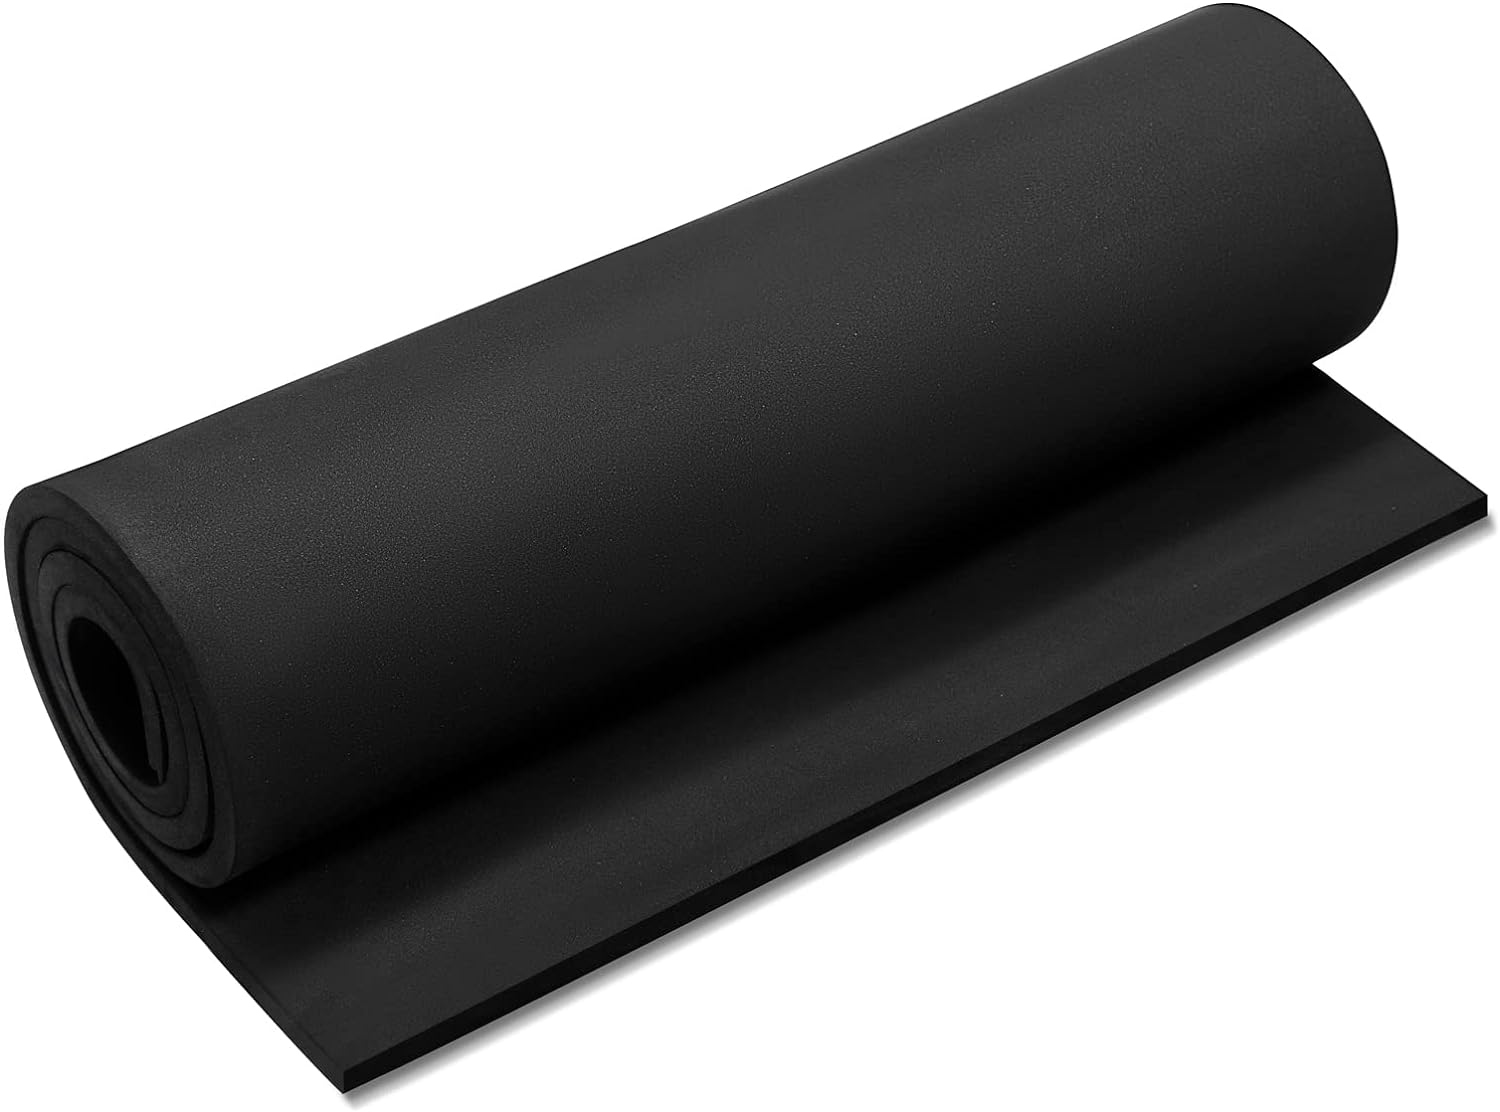 Black Foam Sheets Roll Premium Cosplay Eva Foam Sheet 8mm Thick 13.9"x39" High Density 86kg/m3 For Cosplay Costume Crafts DIY Projects By PAIDU